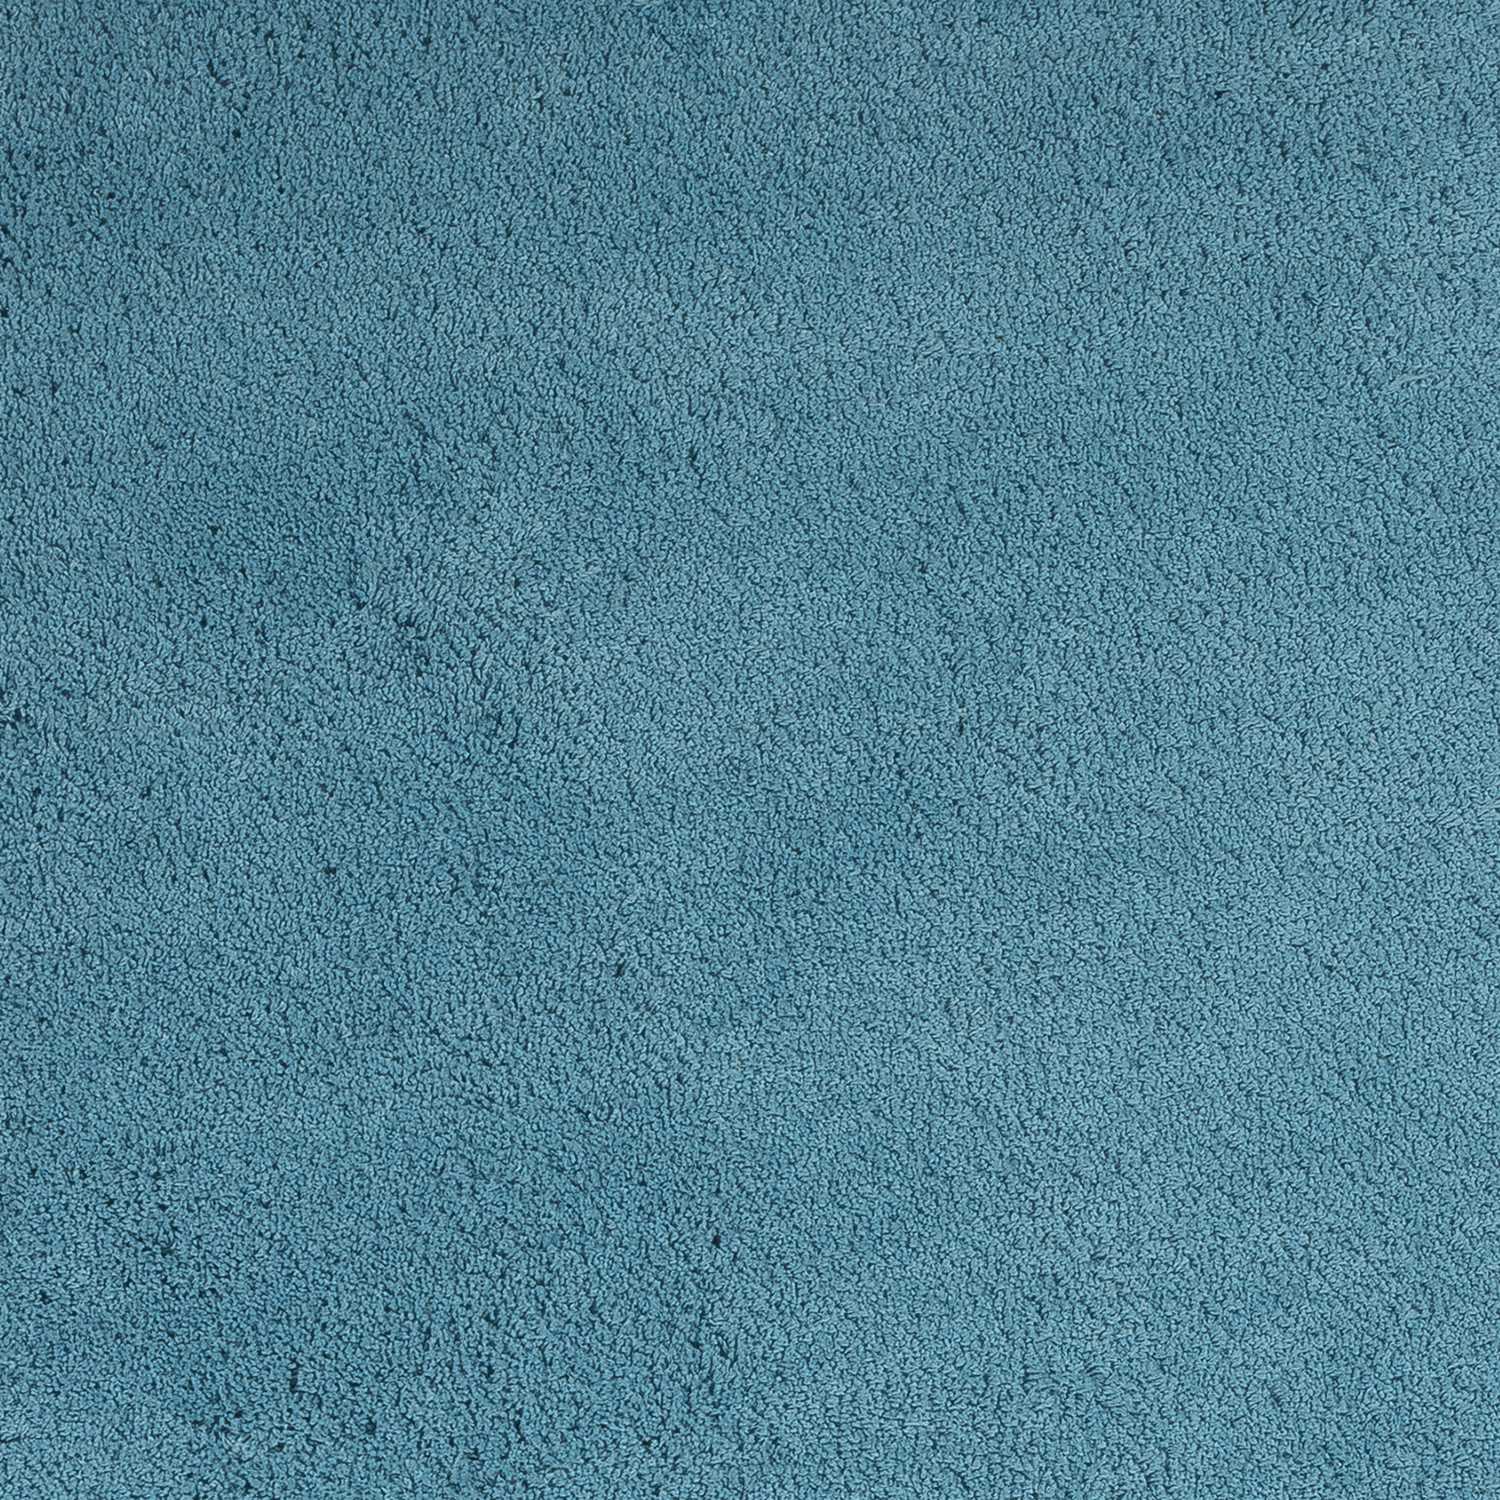 9' x 13' Polyester Highlighter Blue Area Rug